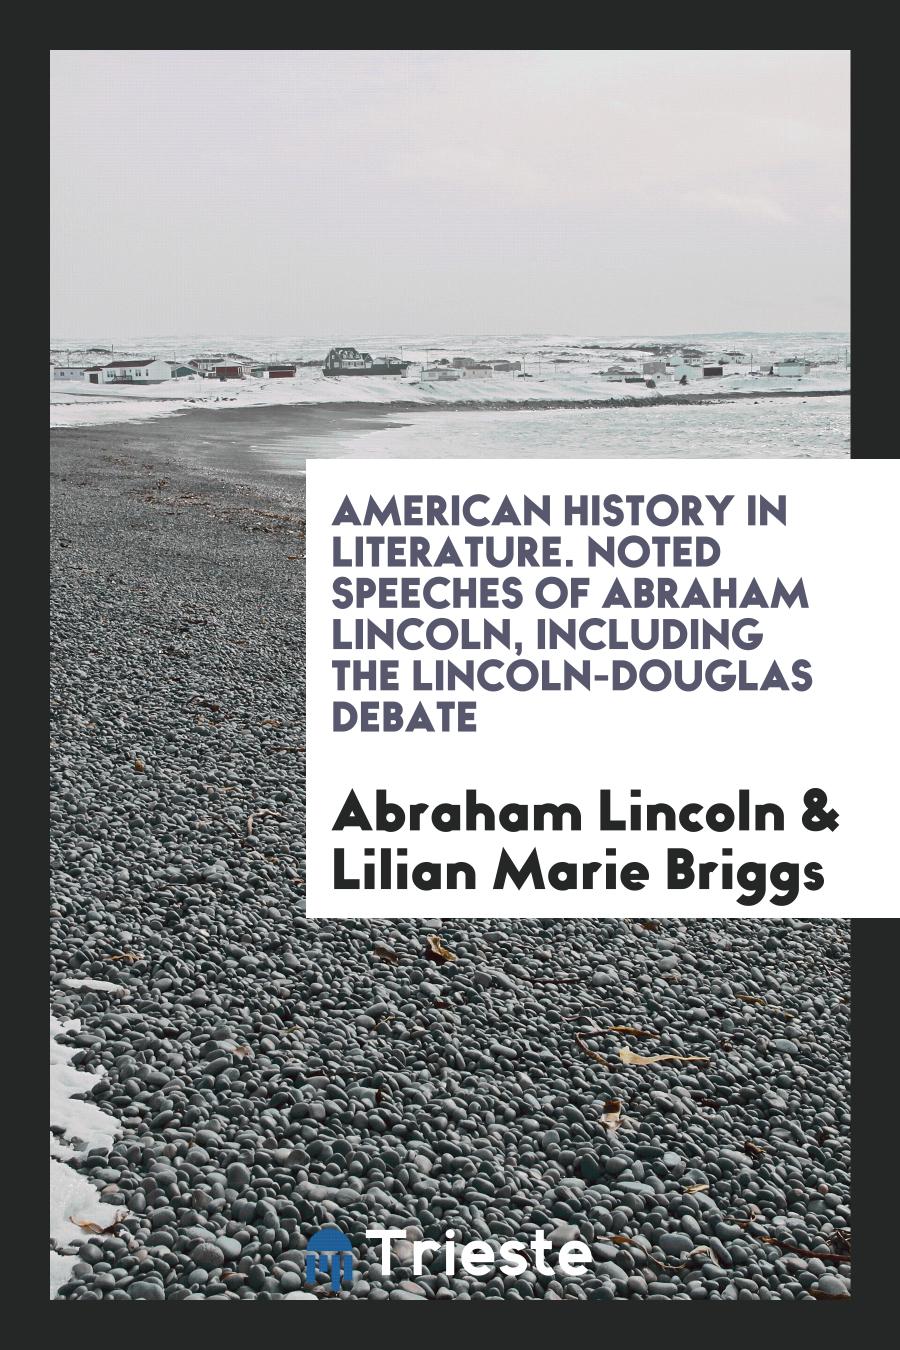 American History in Literature. Noted Speeches of Abraham Lincoln, Including the Lincoln-Douglas Debate